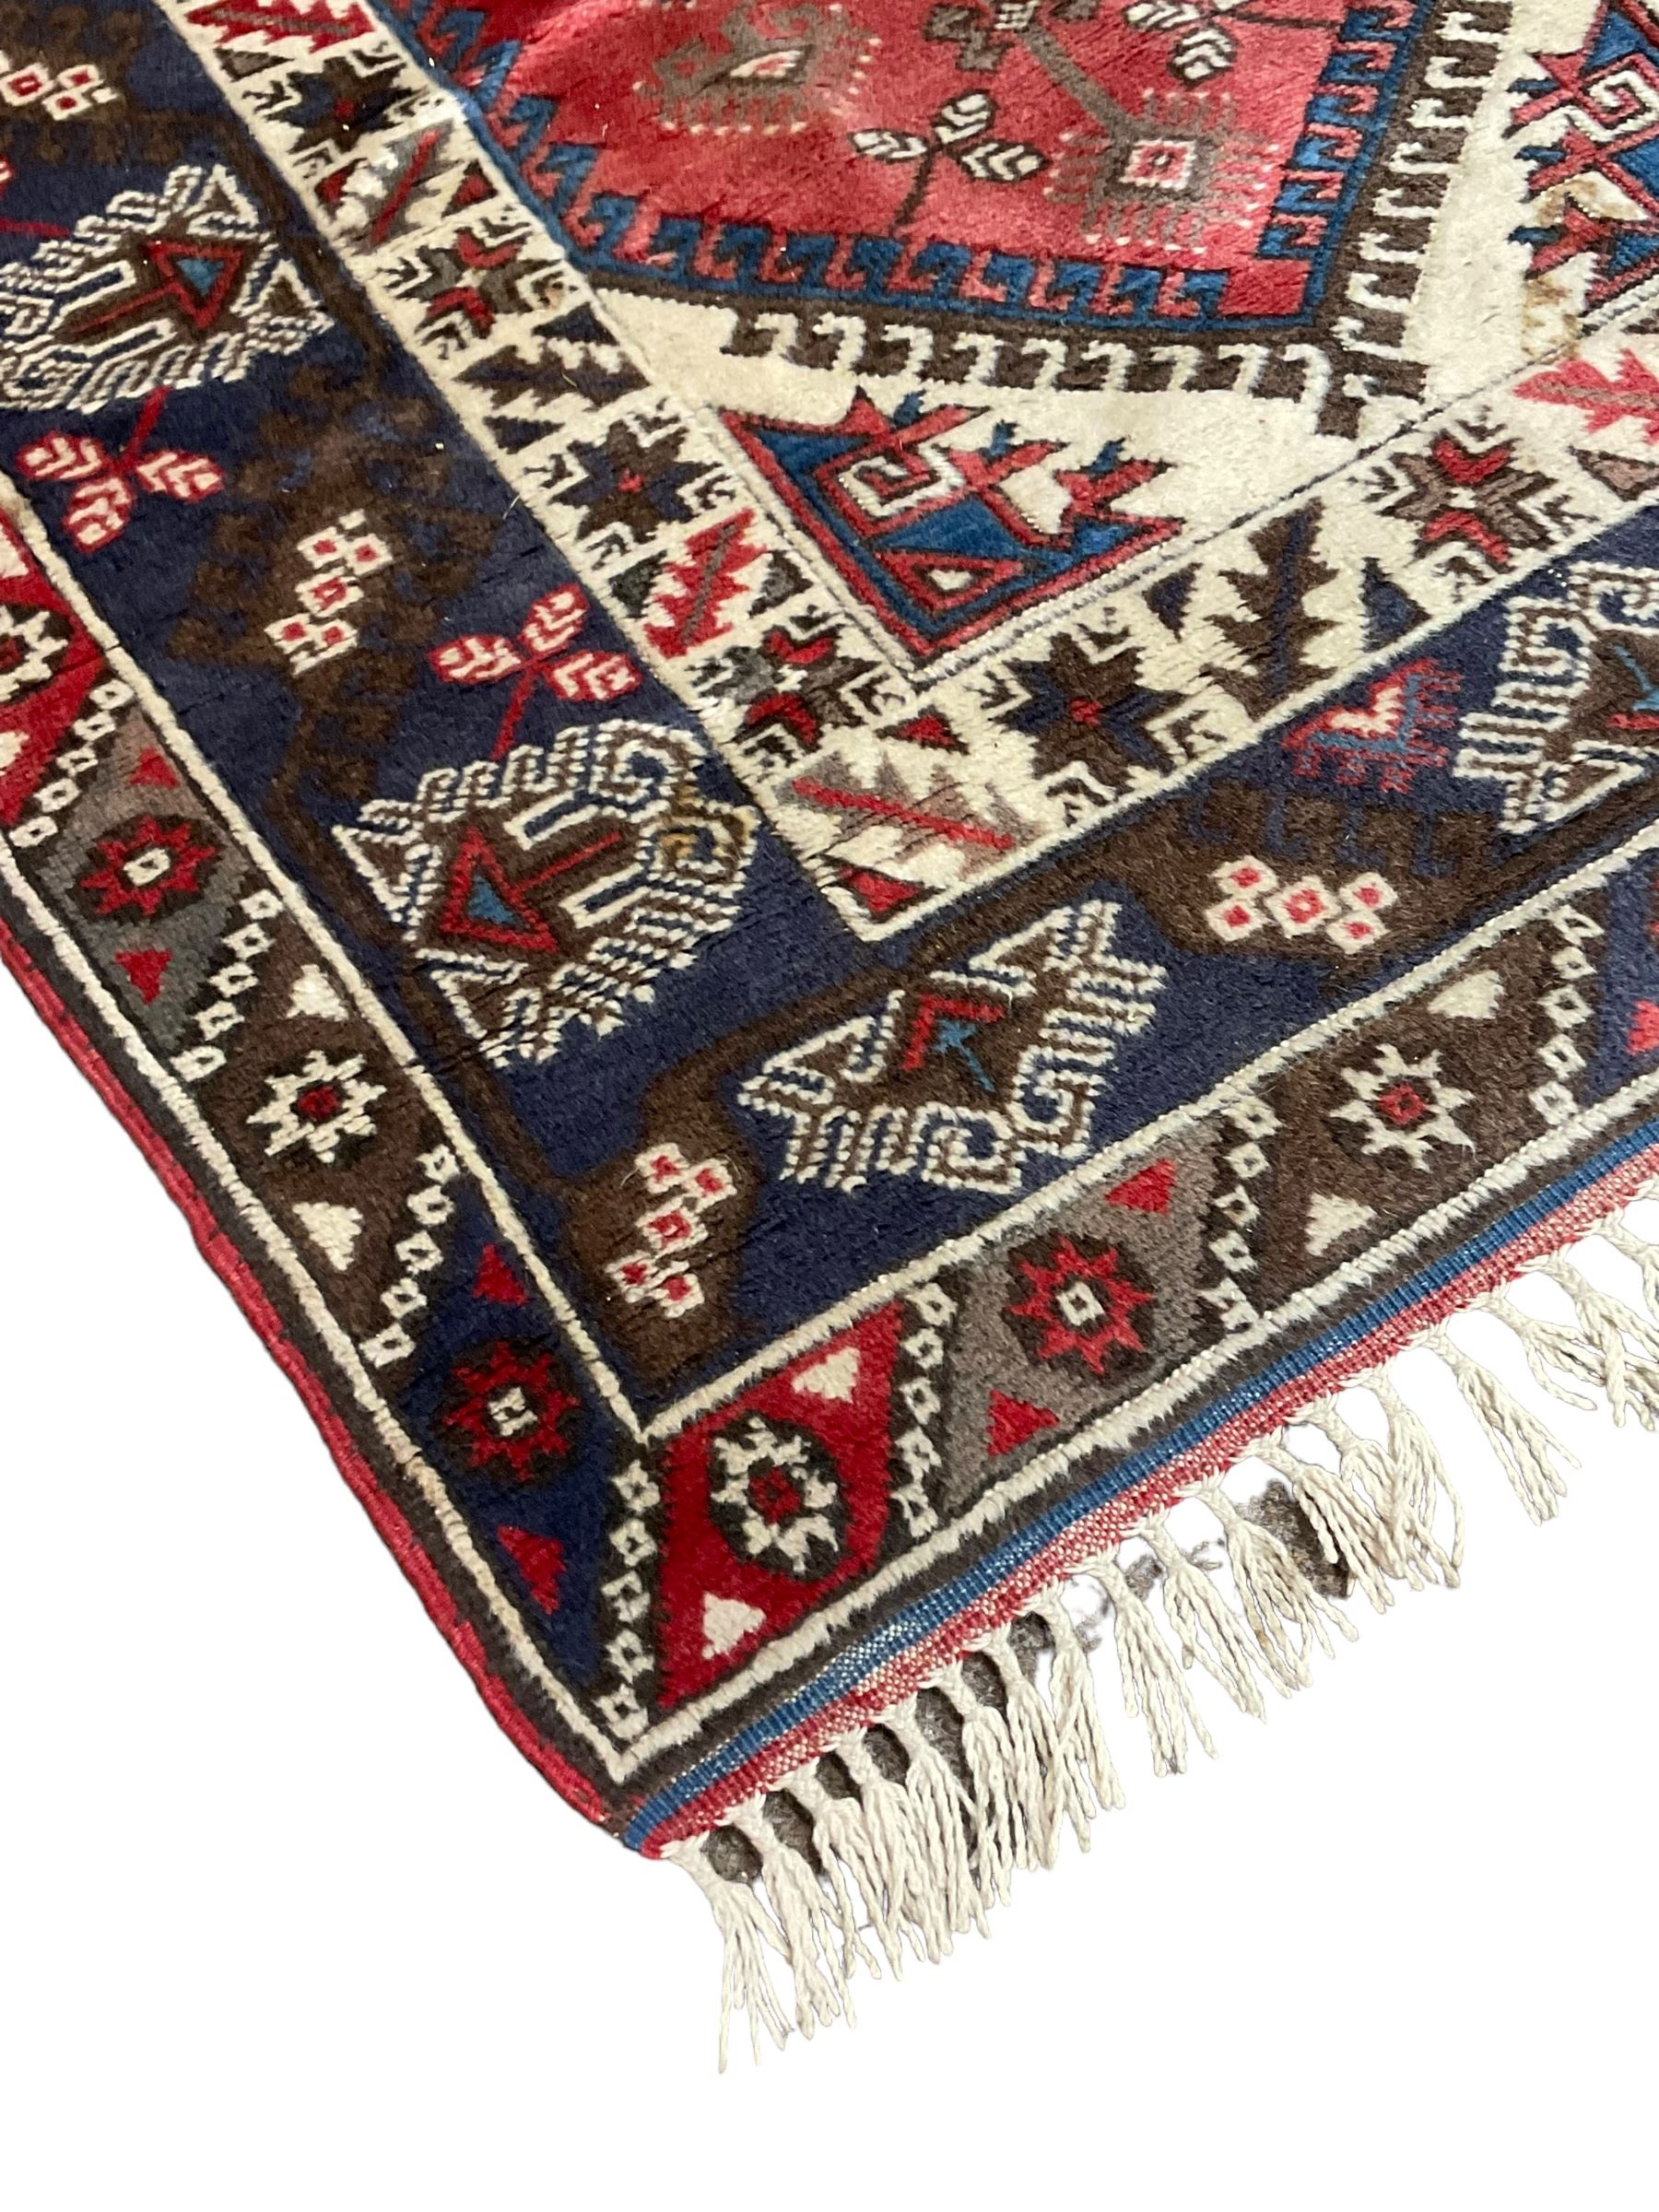 Turkish Dosemealti ivory blue and red ground rug - Image 4 of 7